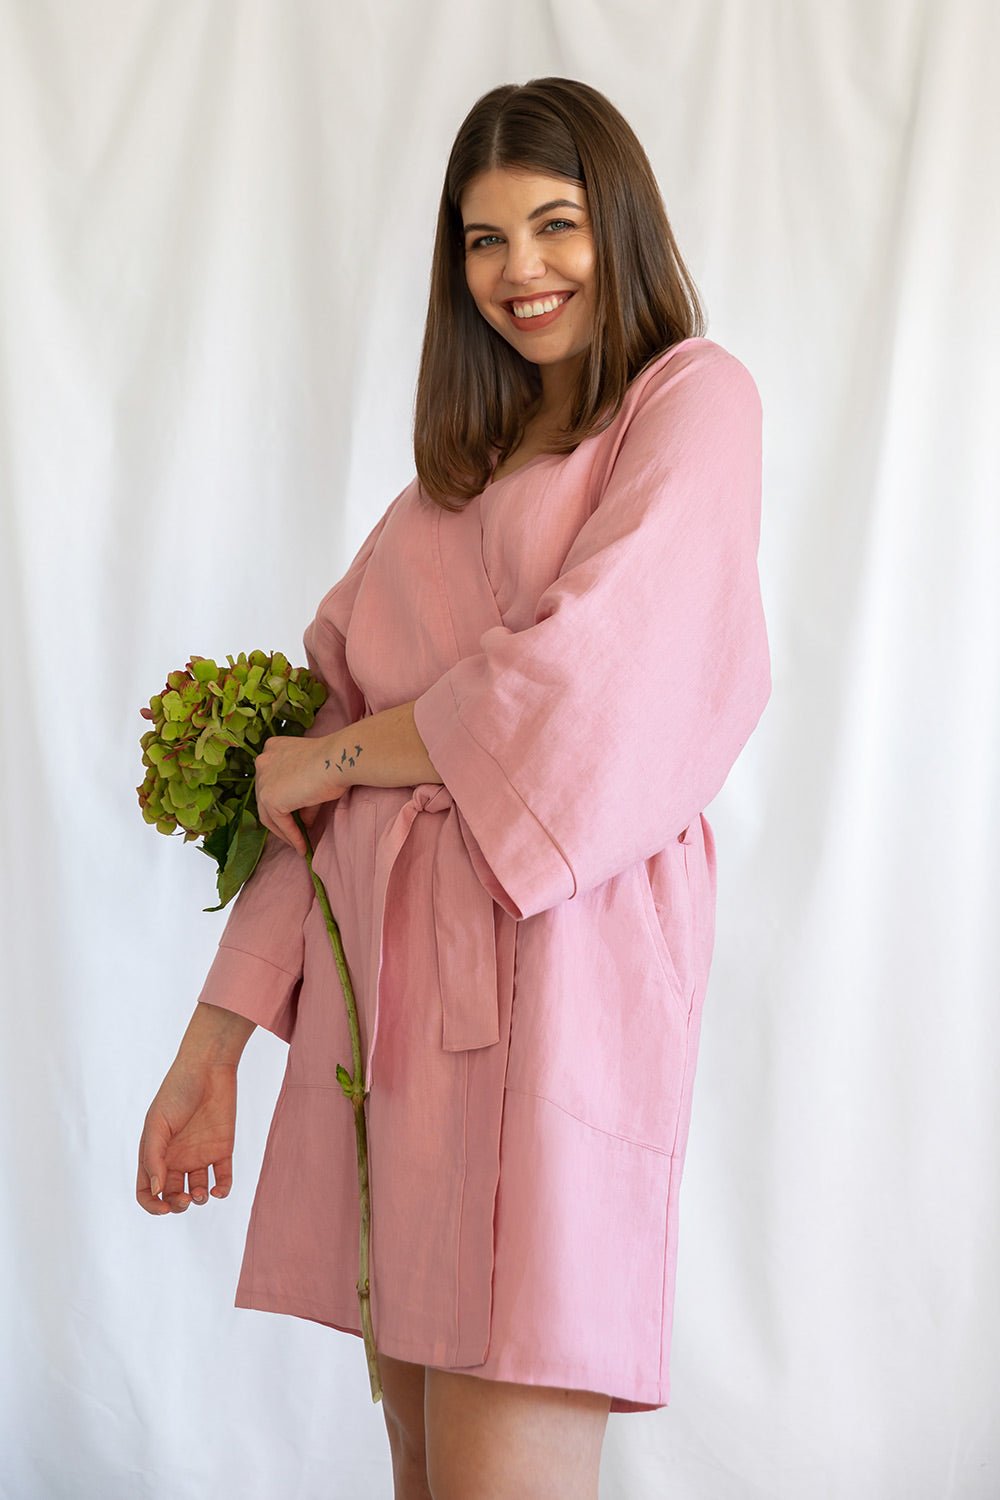 100% linen wedding getting ready bridesmaid robes with pockets New Zealand pink 